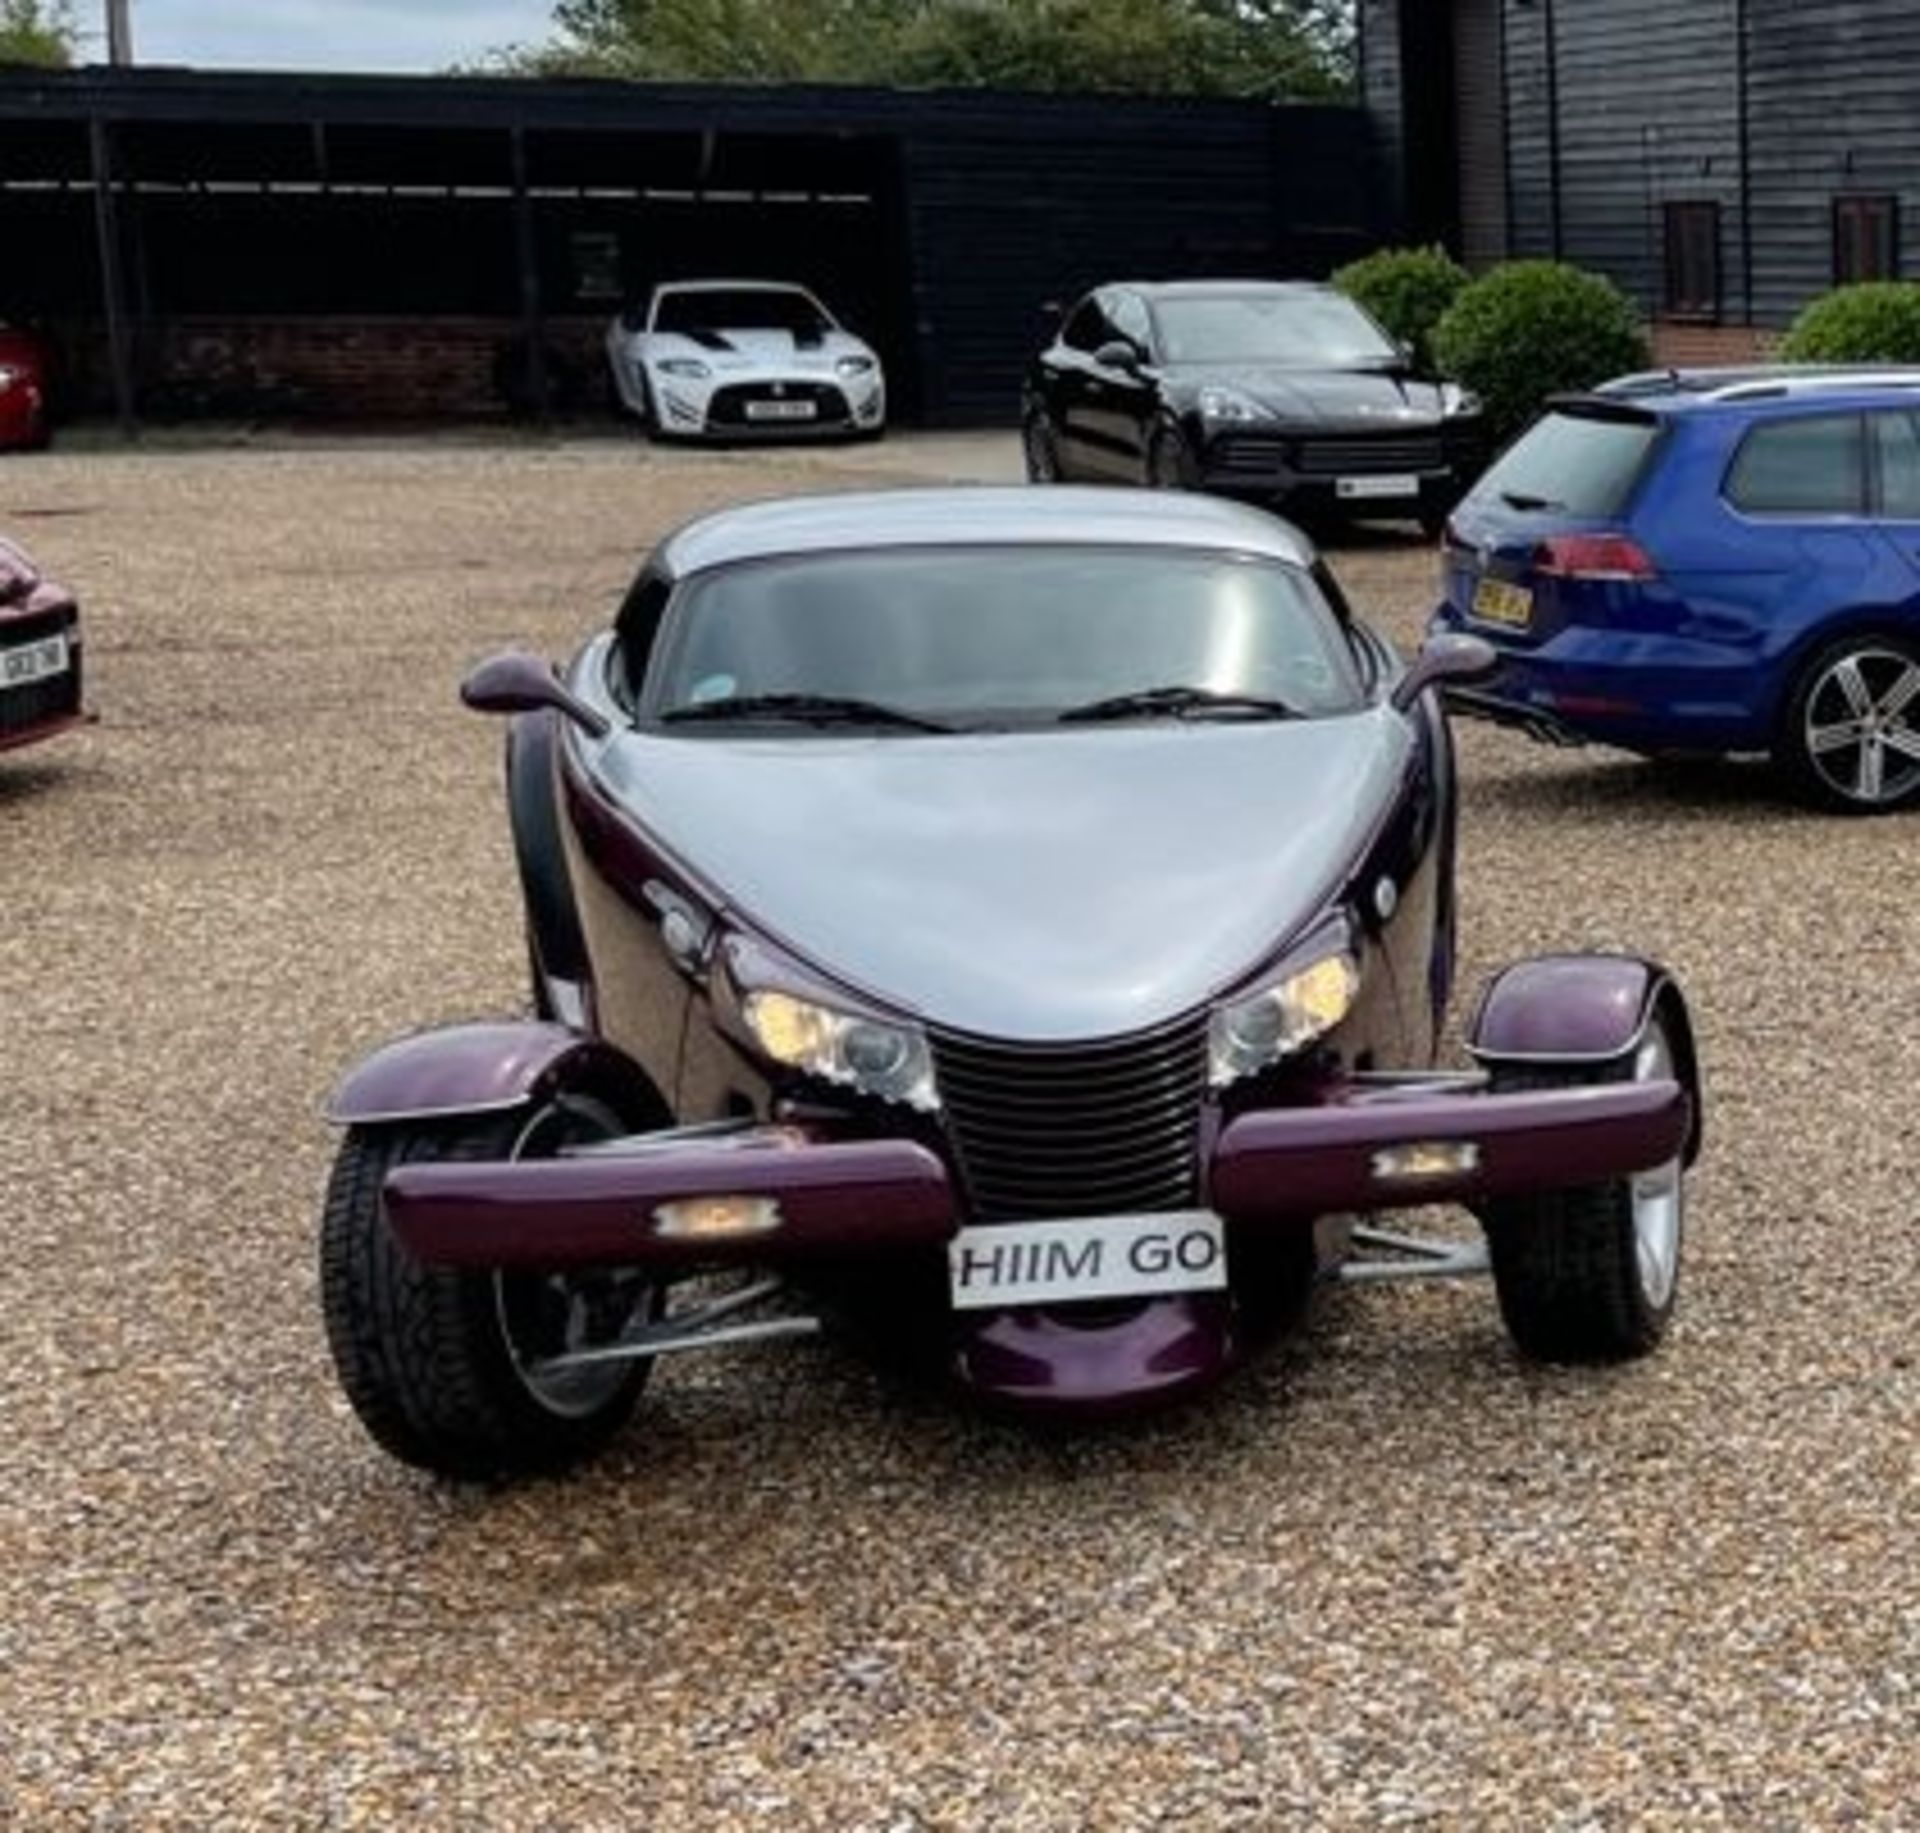 1998 CHRYSLER PLYMOUTH PROWLER V6 2 DOOR CONVERTIBLE, 3500cc PETROL ENGINE, AUTO *NO VAT* - Image 5 of 27